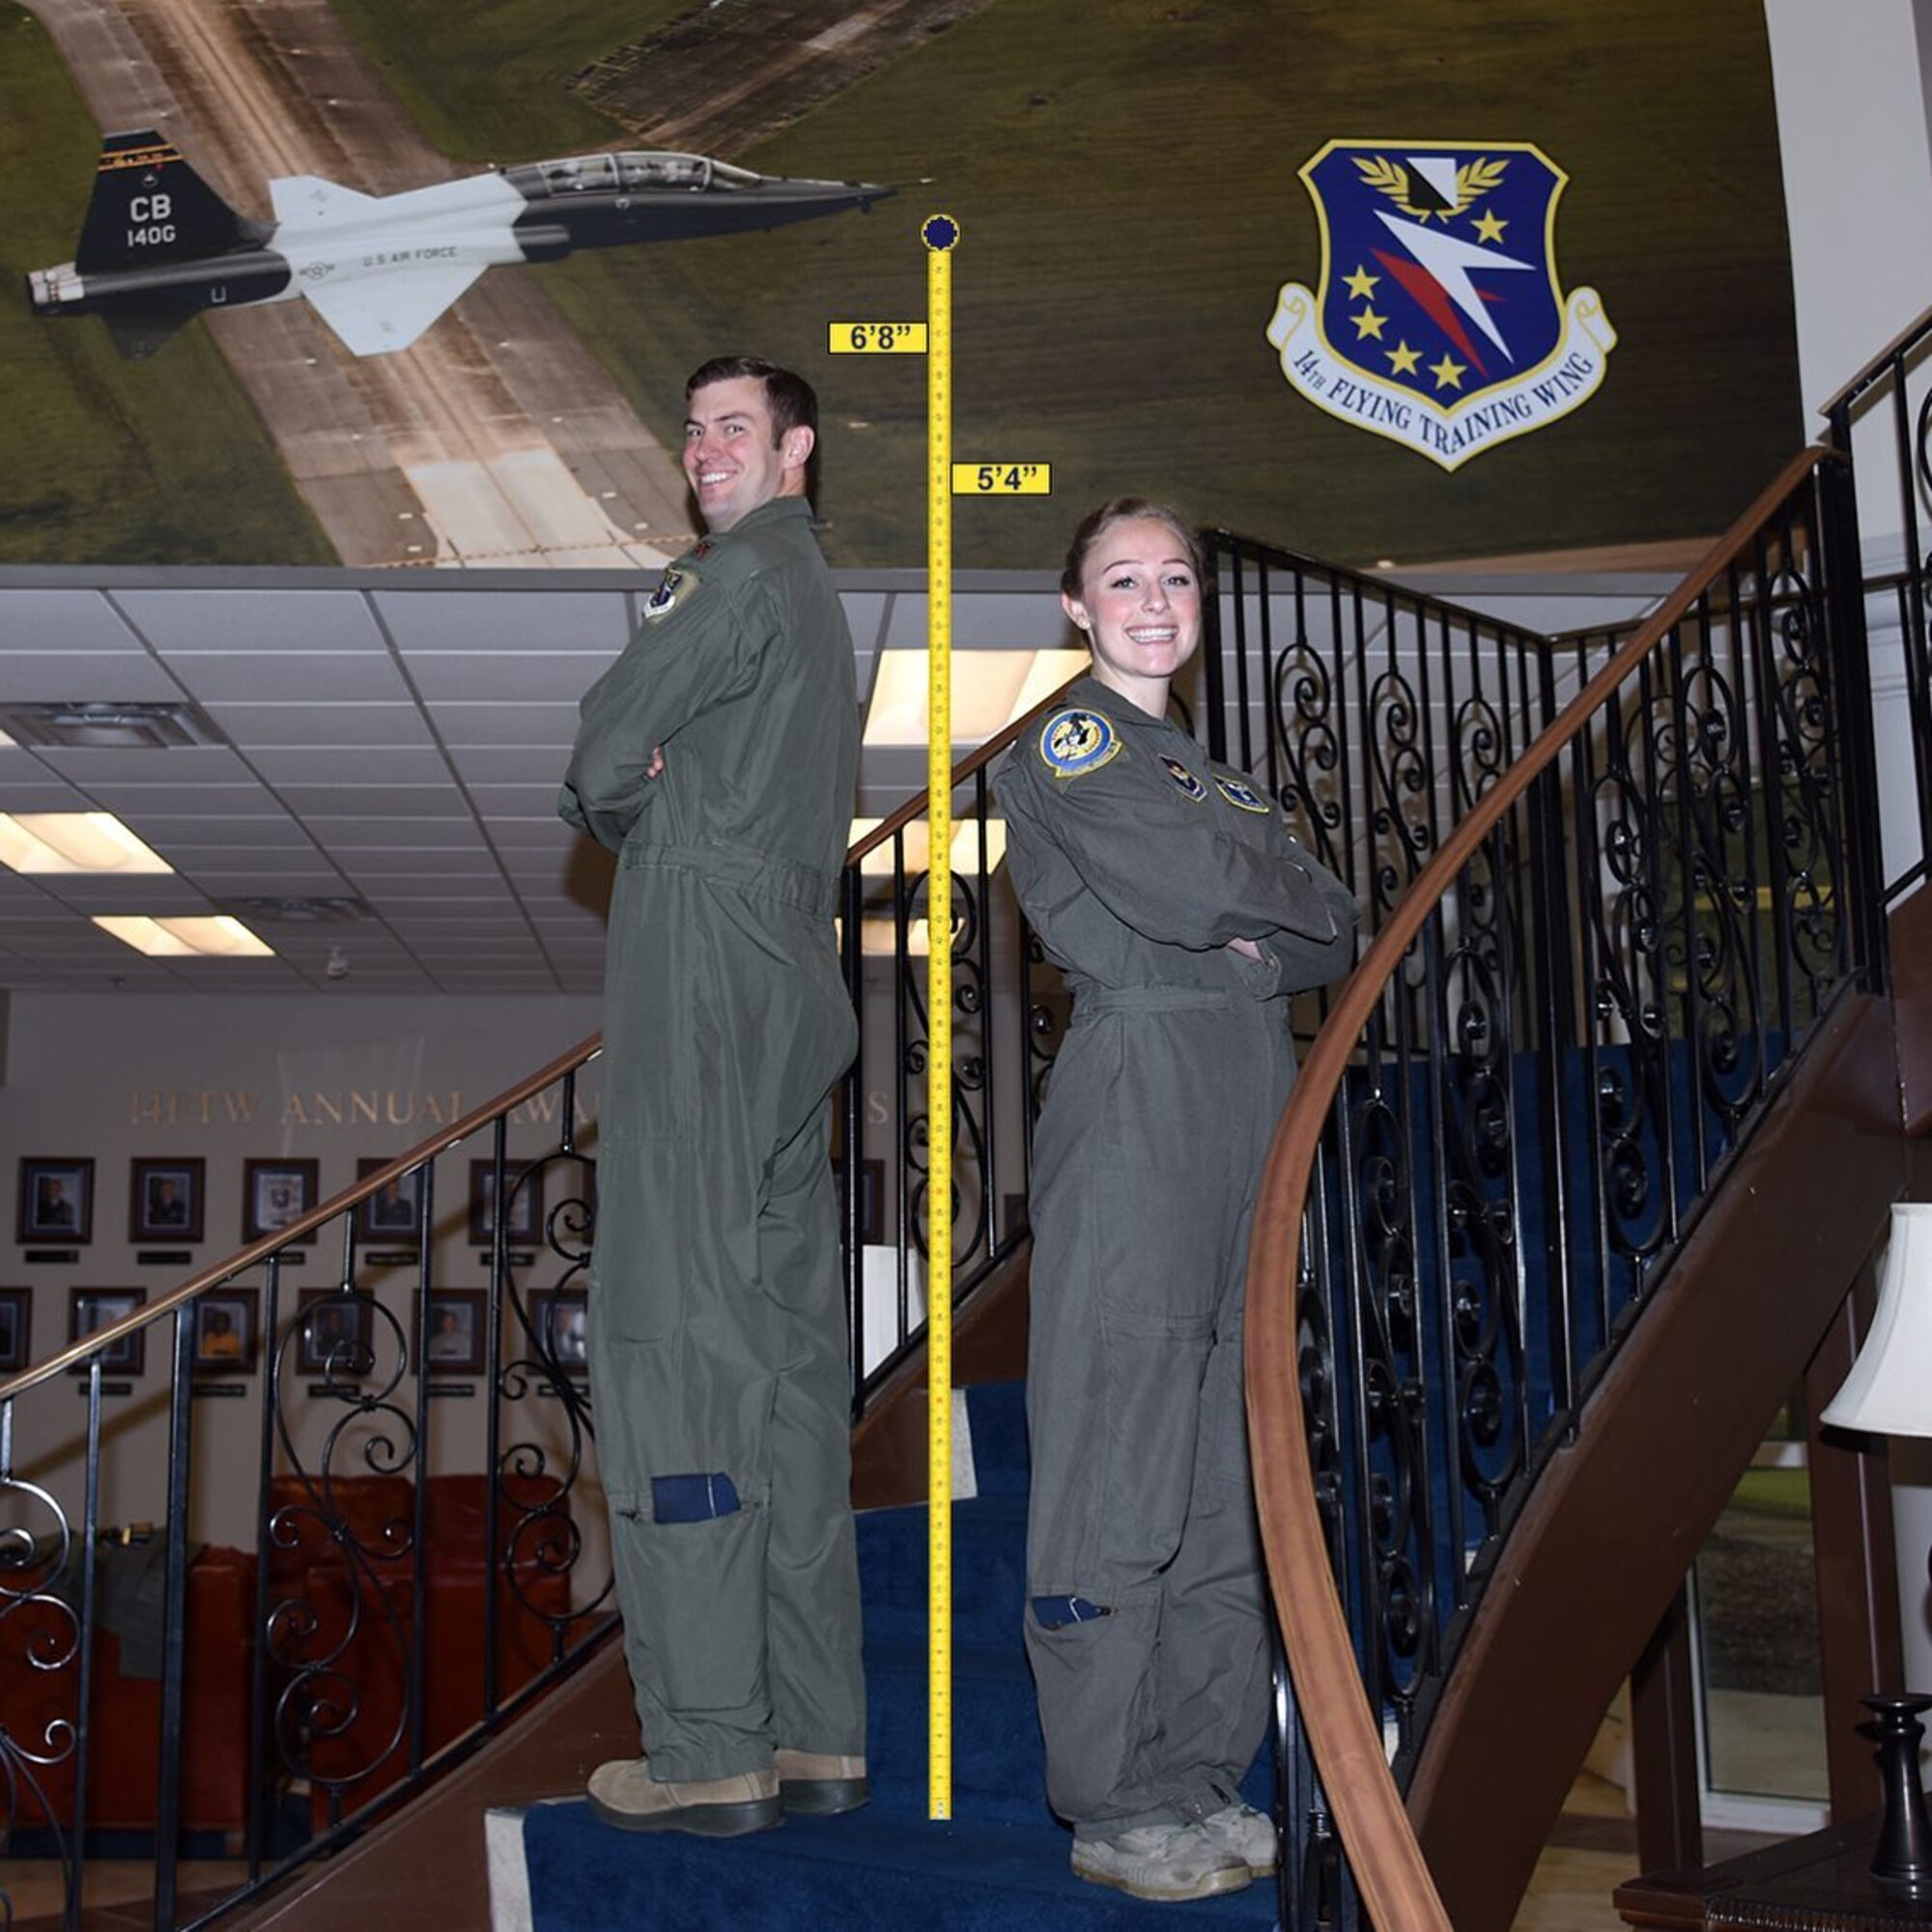 Two instructor pilots from the 14th Flying Training Wing at Columbus Air Force Base, Miss., stand side-by-side to illustrate the varying standing heights of Air Force pilots to dispel the myth that there is one height standard for all Air Force pilots.  Height waivers are available for candidates that do not meet AFI 48-123 standards. If you are interested in learning more about height waivers, work with your commission source or contact the Air Force Call Center at 1-800-423-USAF. (U.S. Air Force courtesy photo)